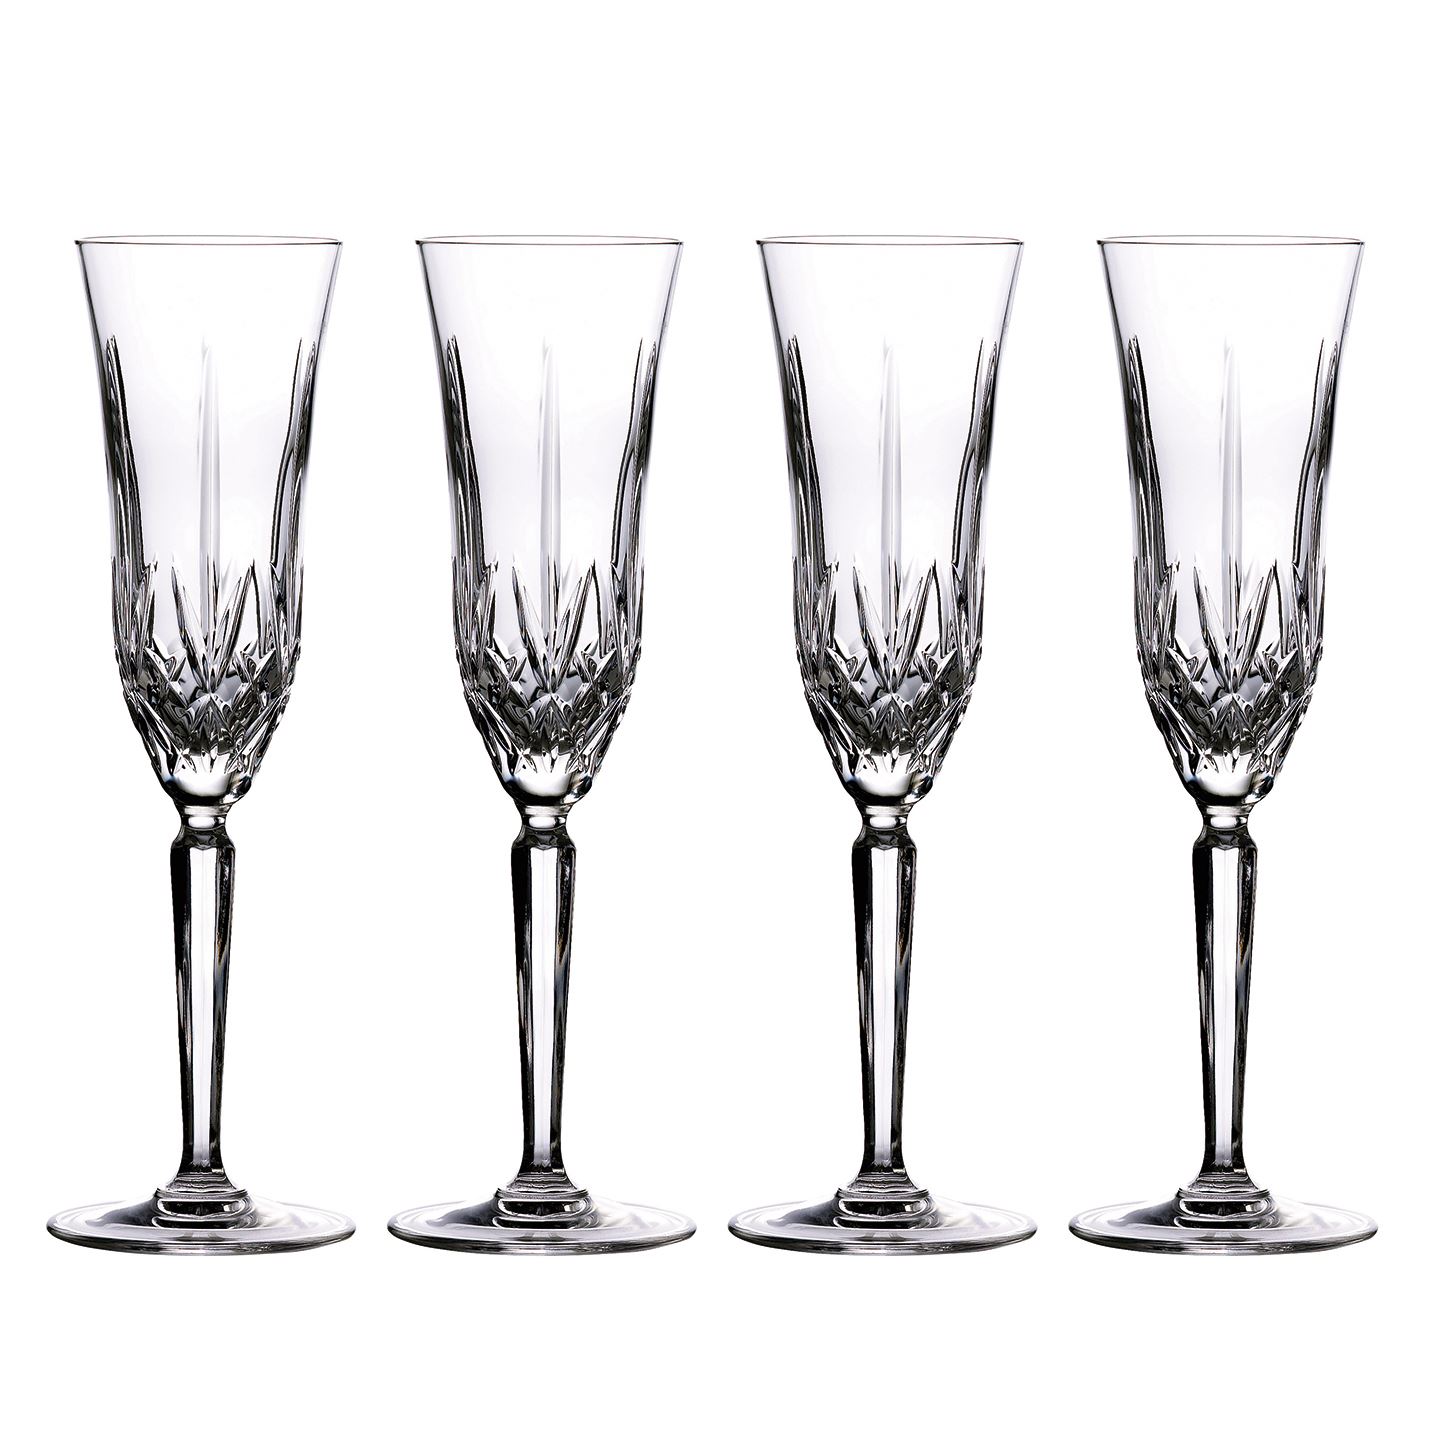 Marquis Lacey Range by Waterford set of 4 champagne flutes 